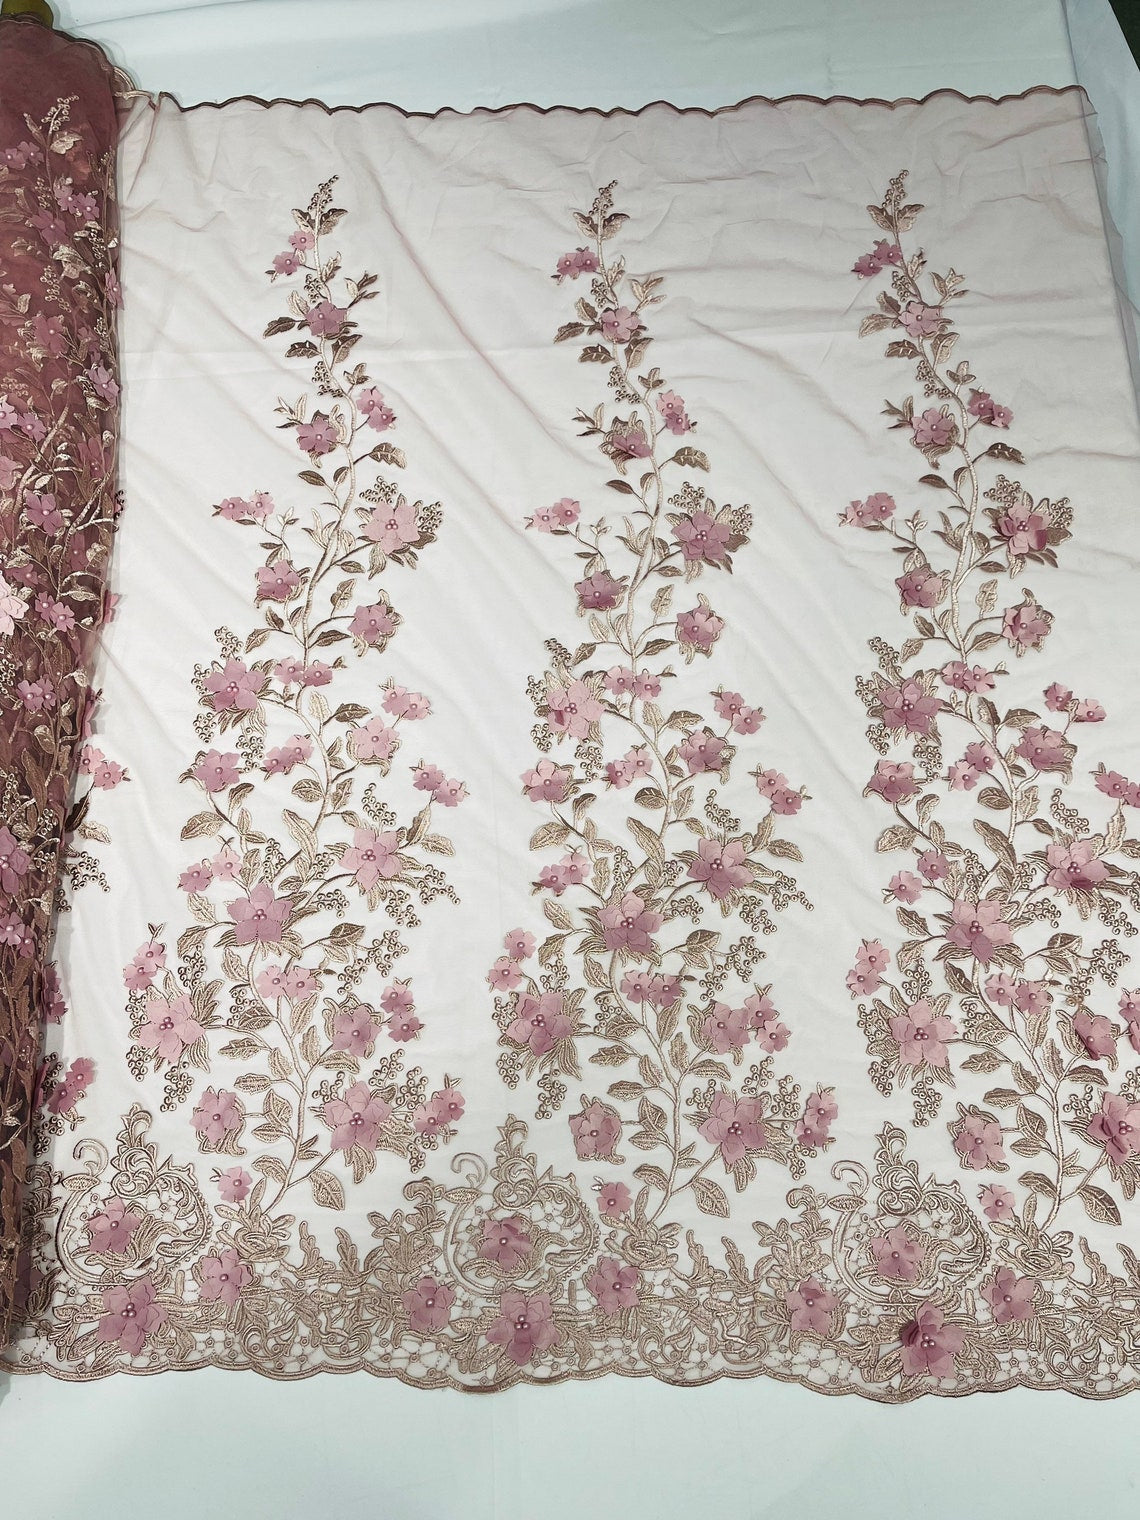 3D Floral Princess Fabric - Dusty Rose - Embroidered Floral Lace Fabric with 3D Flowers By Yard